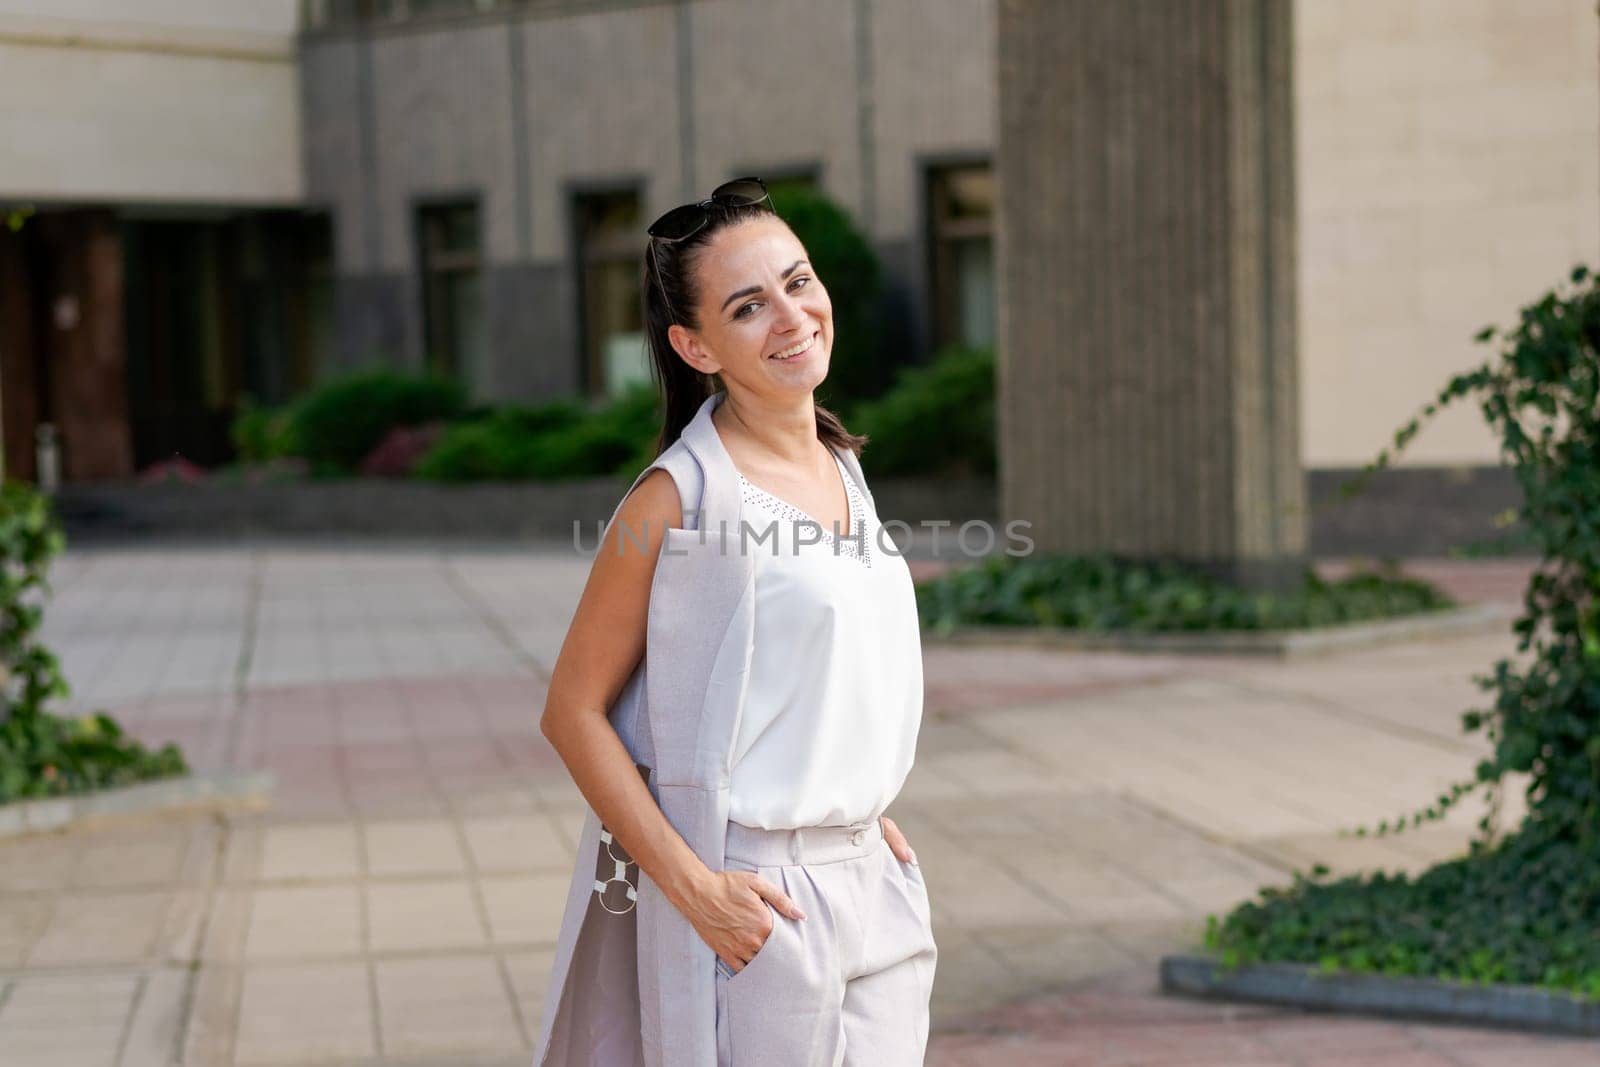 Confident smiling businesswoman standing on the street, portrait. Proud successful female entrepreneur in suit posing while looking at camera outdoors.